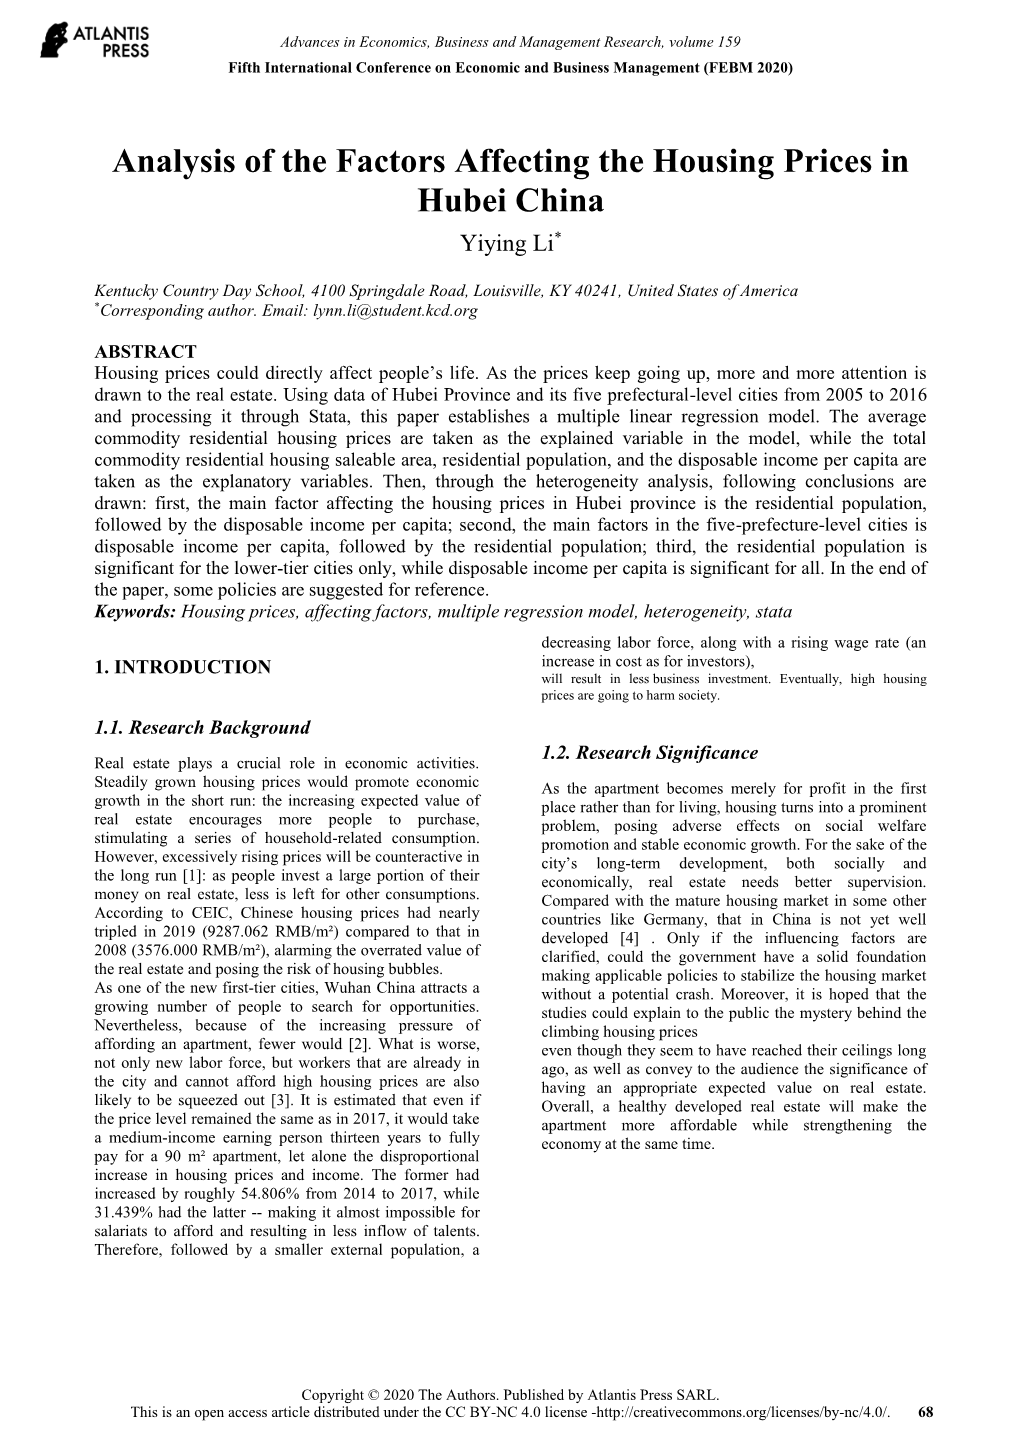 Analysis of the Factors Affecting the Housing Prices in Hubei China Yiying Li*